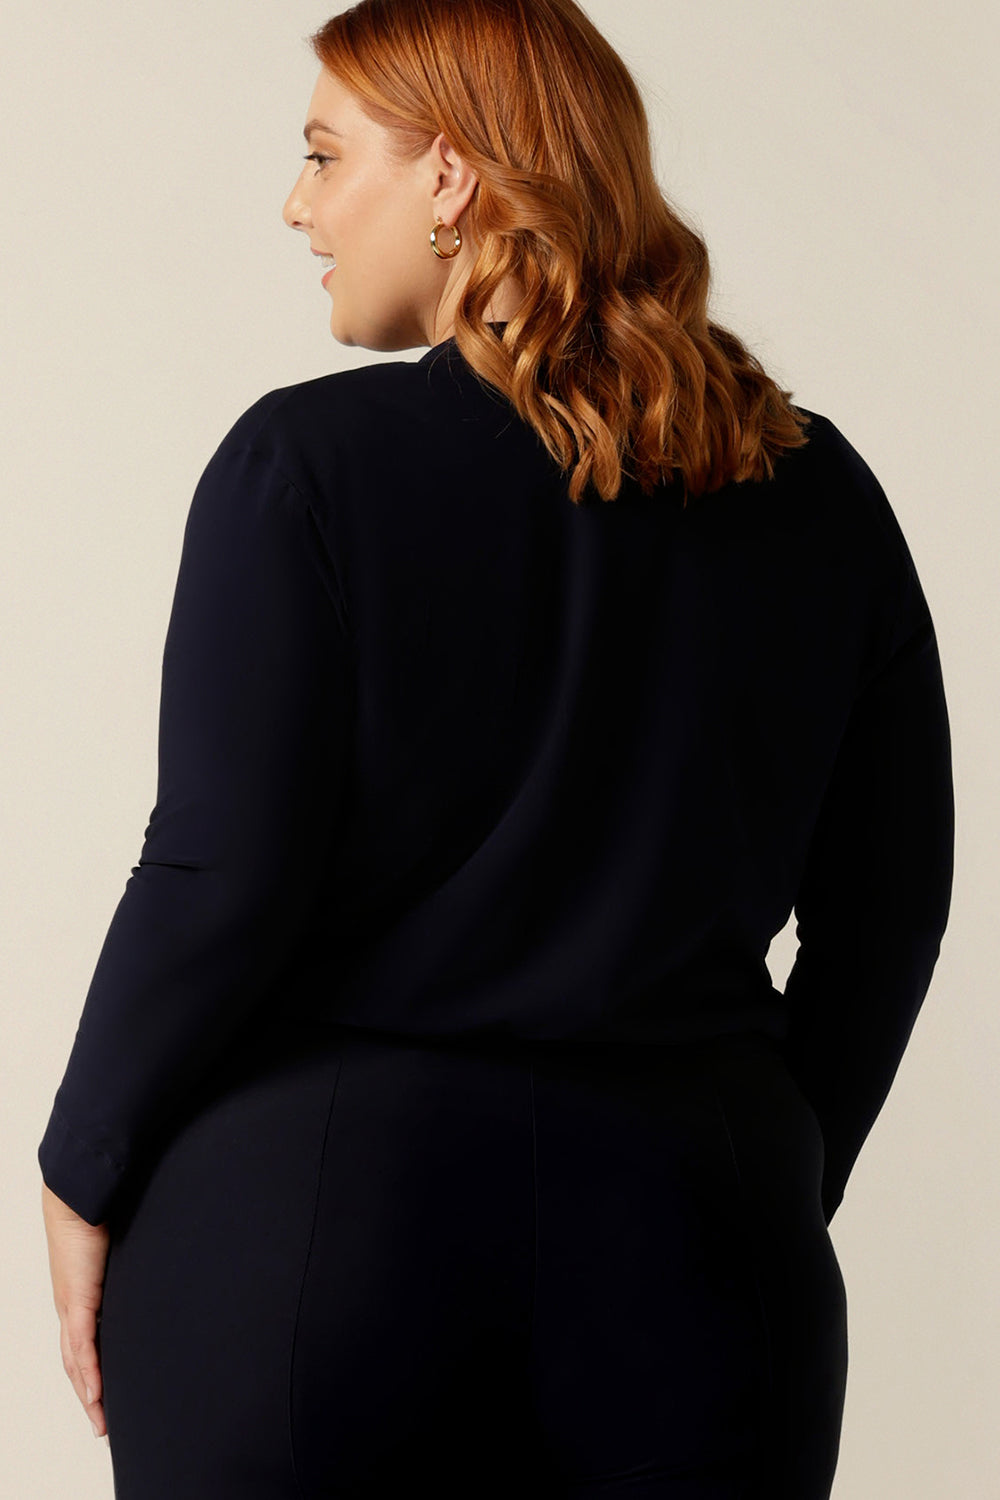 A plus size woman wears a soft navy jacket in a size 18. The best jacket for autumn/winter, this long sleeves 2-button cover-up is a as comfortable as a cardigan but with a corporate edge that transitions for work wear.